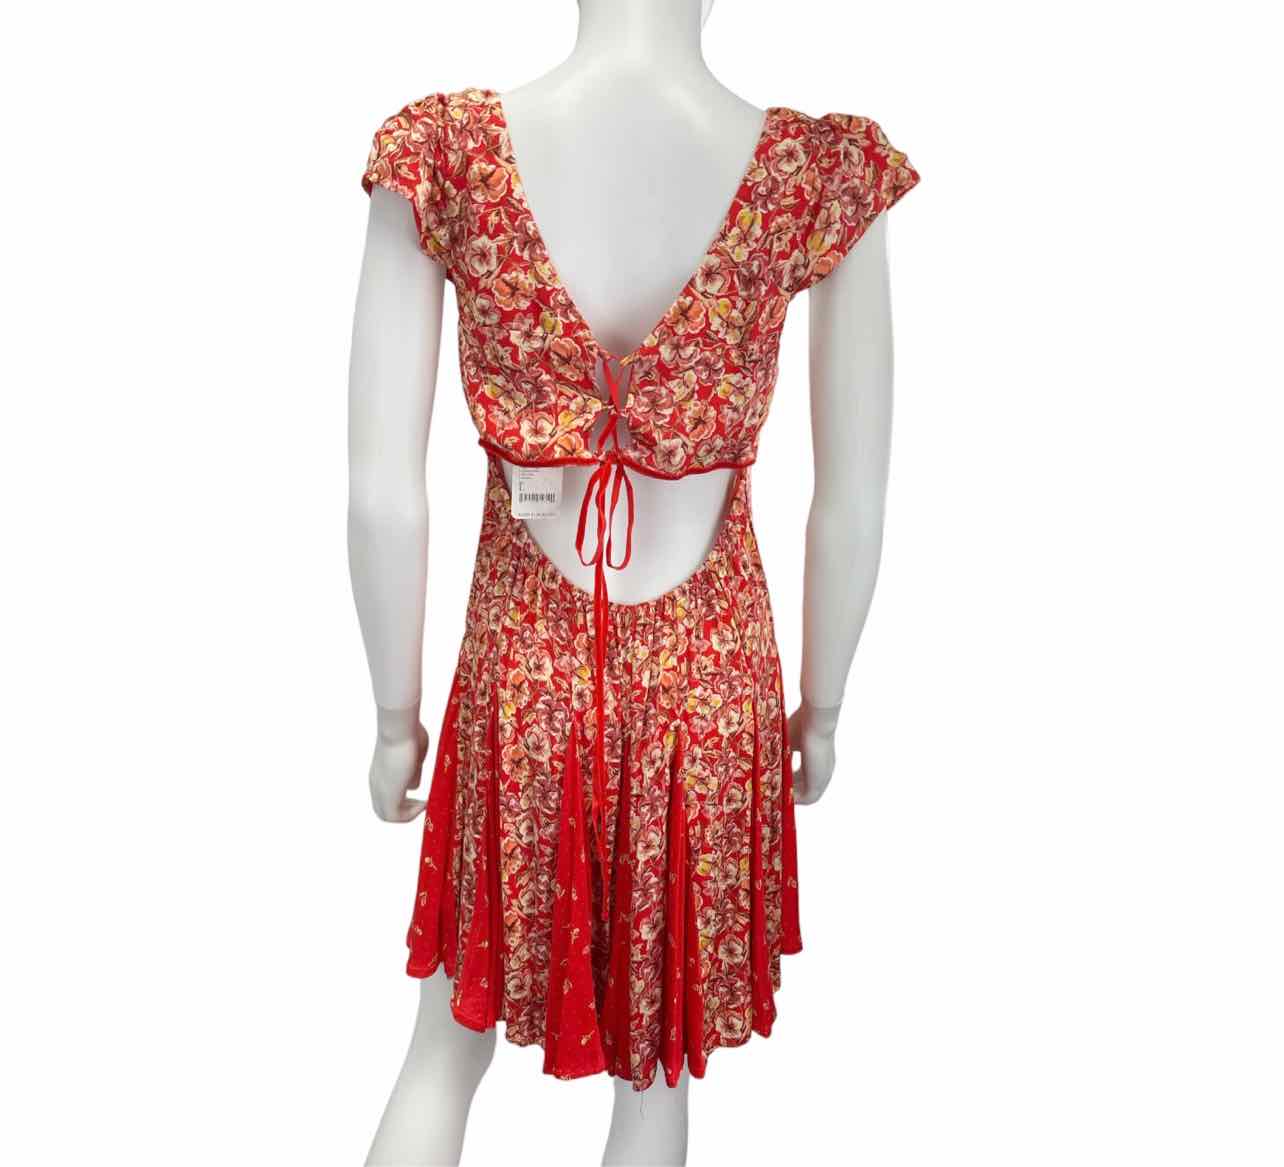 Free People NWT Red Floral Print Dress Size L